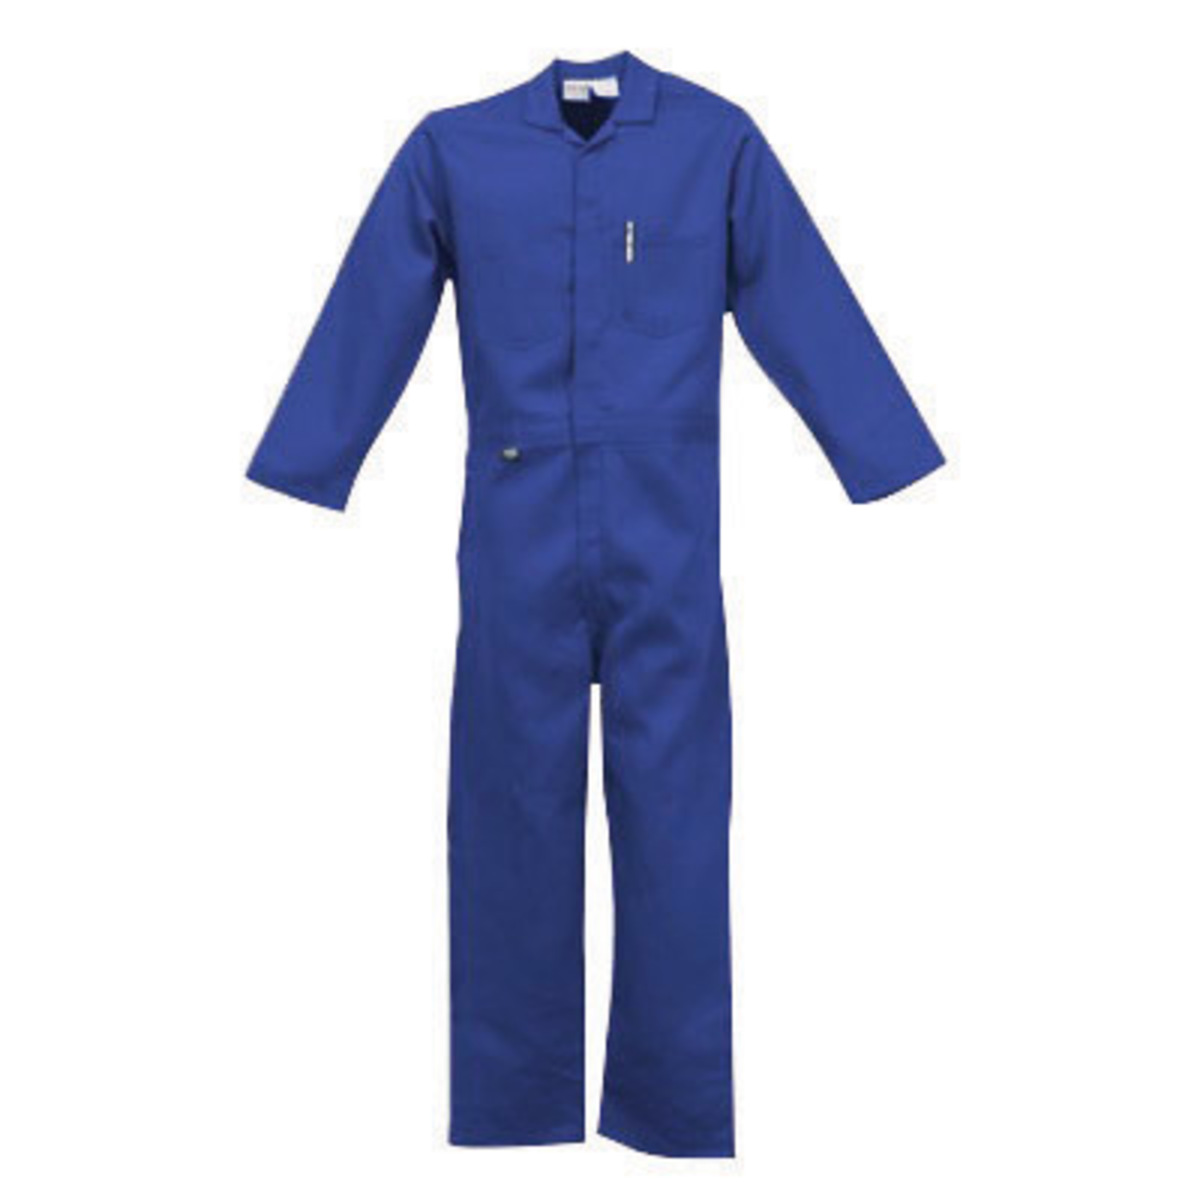 Stanco Safety Products™ Large Tall Royal Blue Nomex® IIIA Arc Rated Flame Resistant Coveralls With Front Zipper Closure And 1 (4